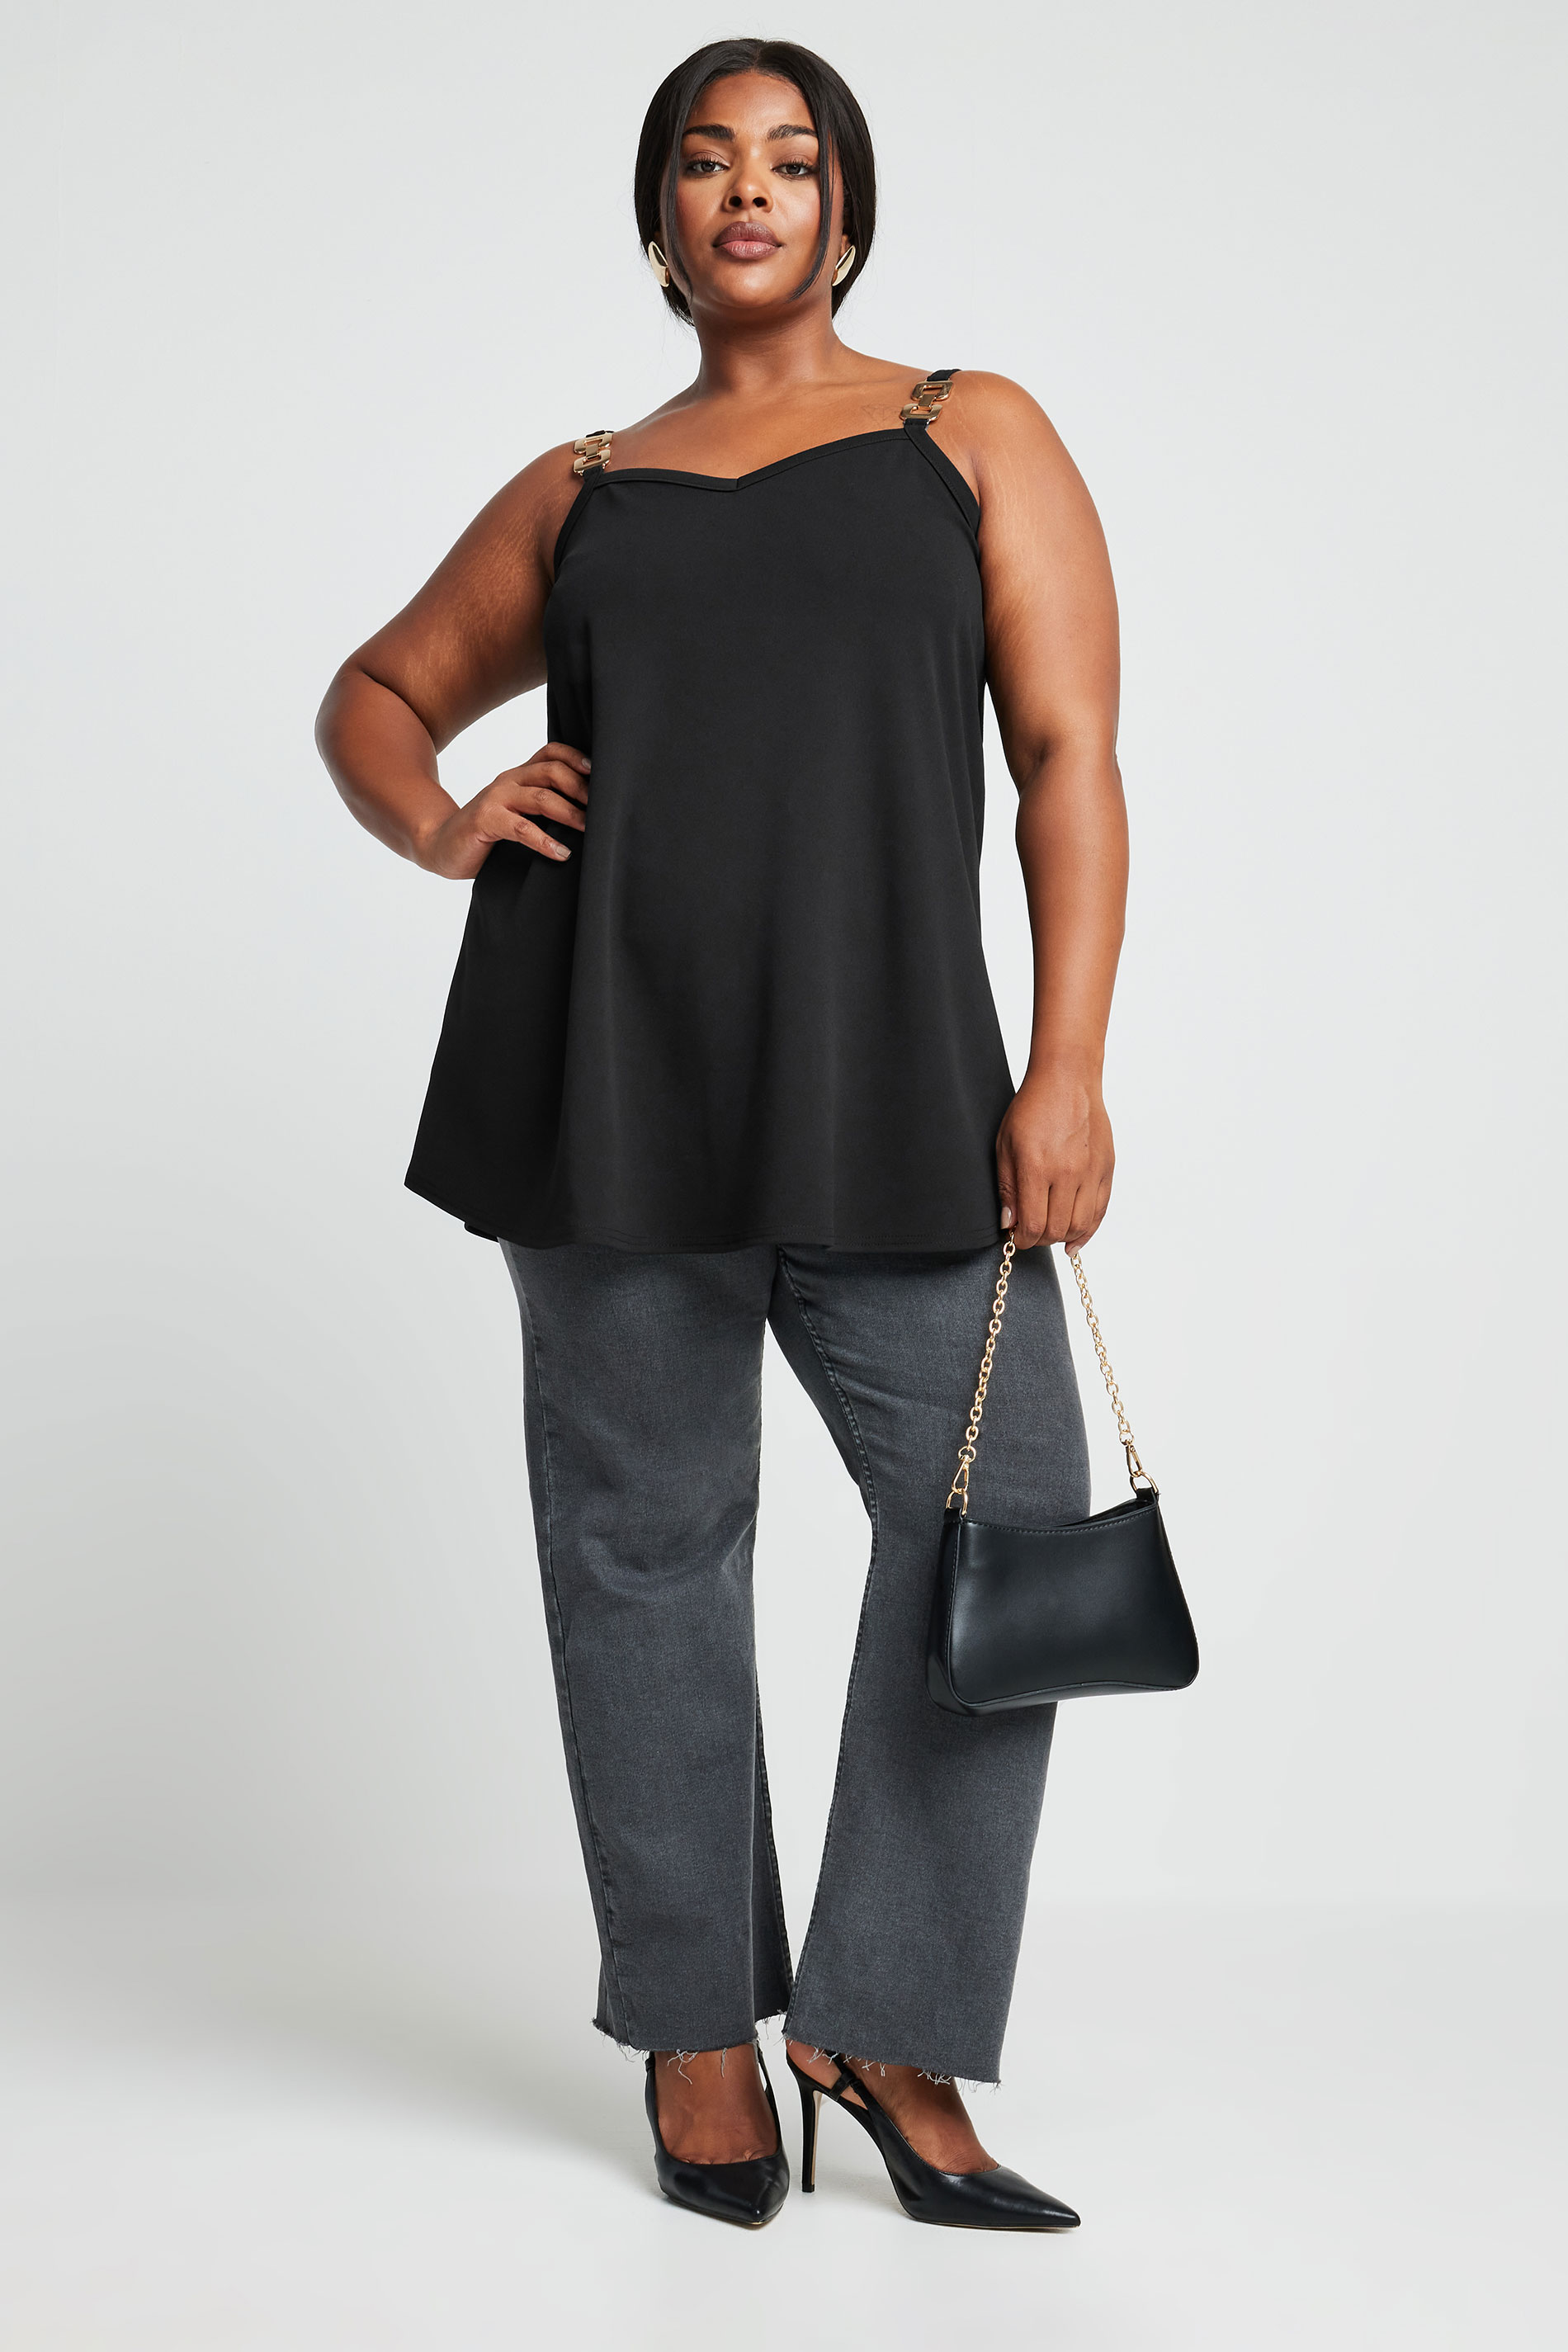 LIMITED COLLECTION Plus Size Black Chain Strap Cami Top | Yours Clothing 2